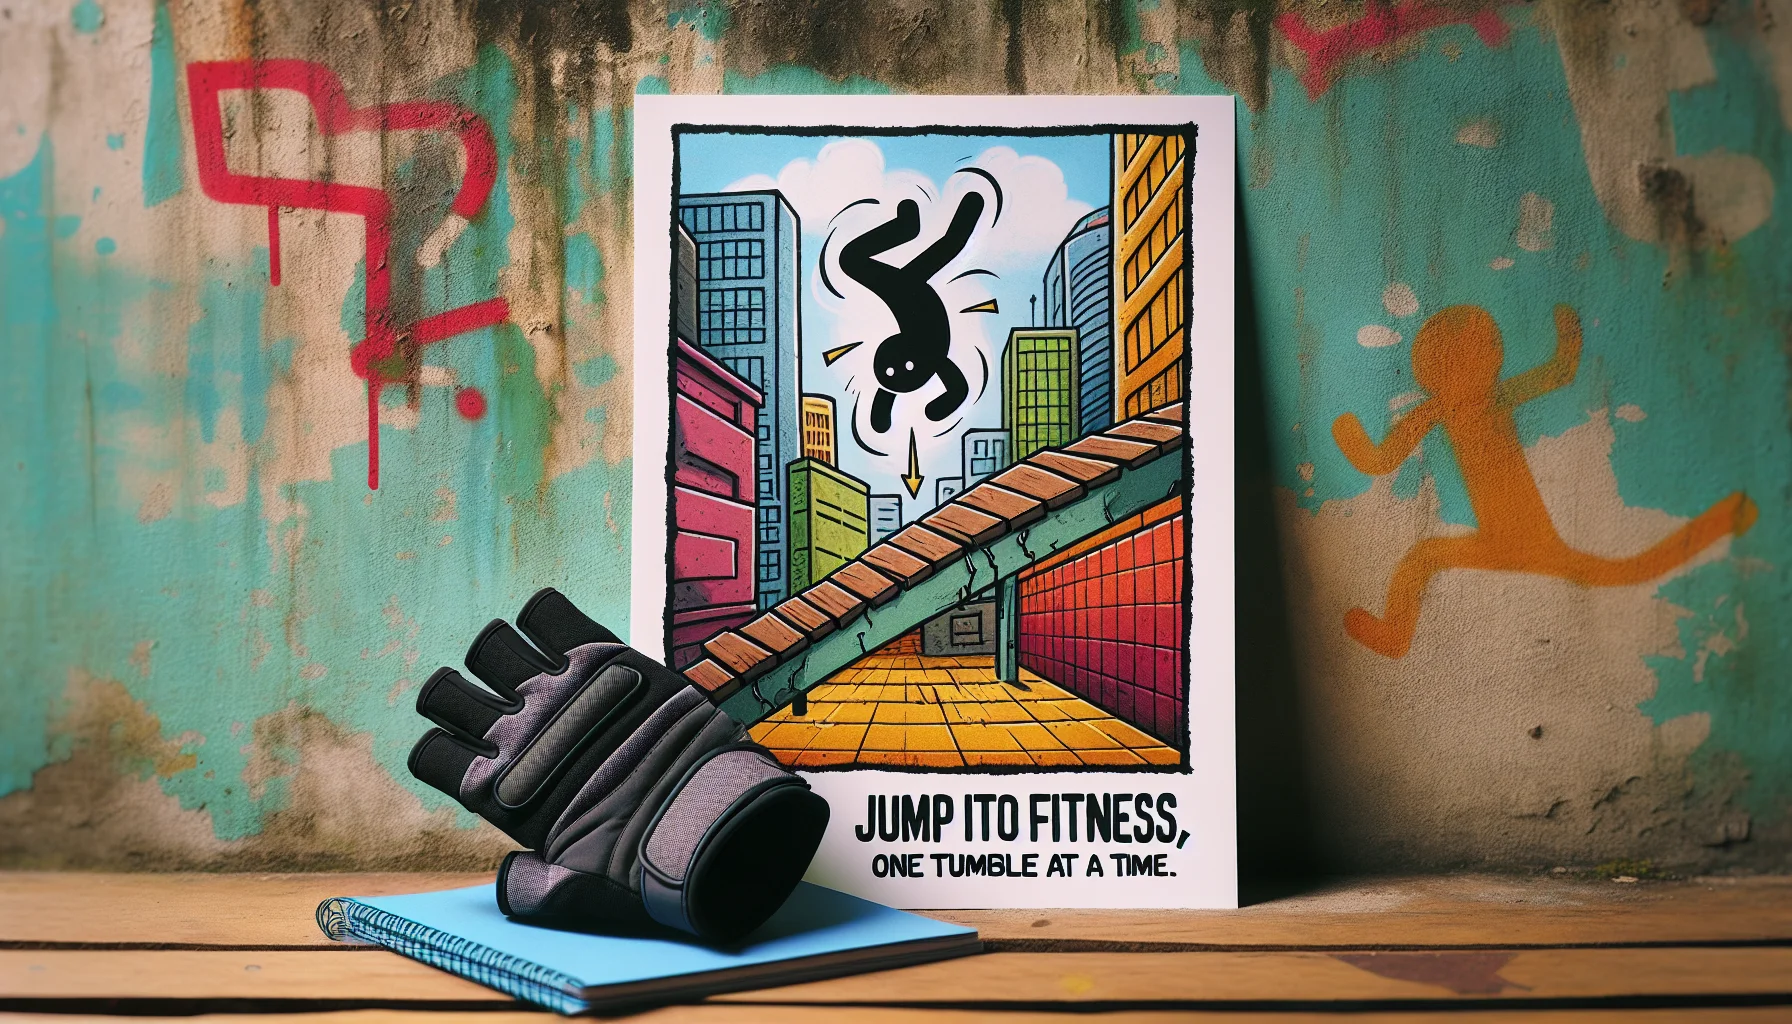 Design a humorous scene promoting a fitness lifestyle through parkour. The focus of the image is a pair of parkour gloves laying in an urban environment, maybe on a colorful wall. Next to the gloves is a hand-drawn doodle of a stick figure attempting a daring parkour move but somersaulting in a silly way. The mood of the scene is playful and jovial, encouraging viewers not just to exercise, but to enjoy the process as well. Include a catchy slogan at the bottom that reads, 'Jump into fitness, one tumble at a time.'